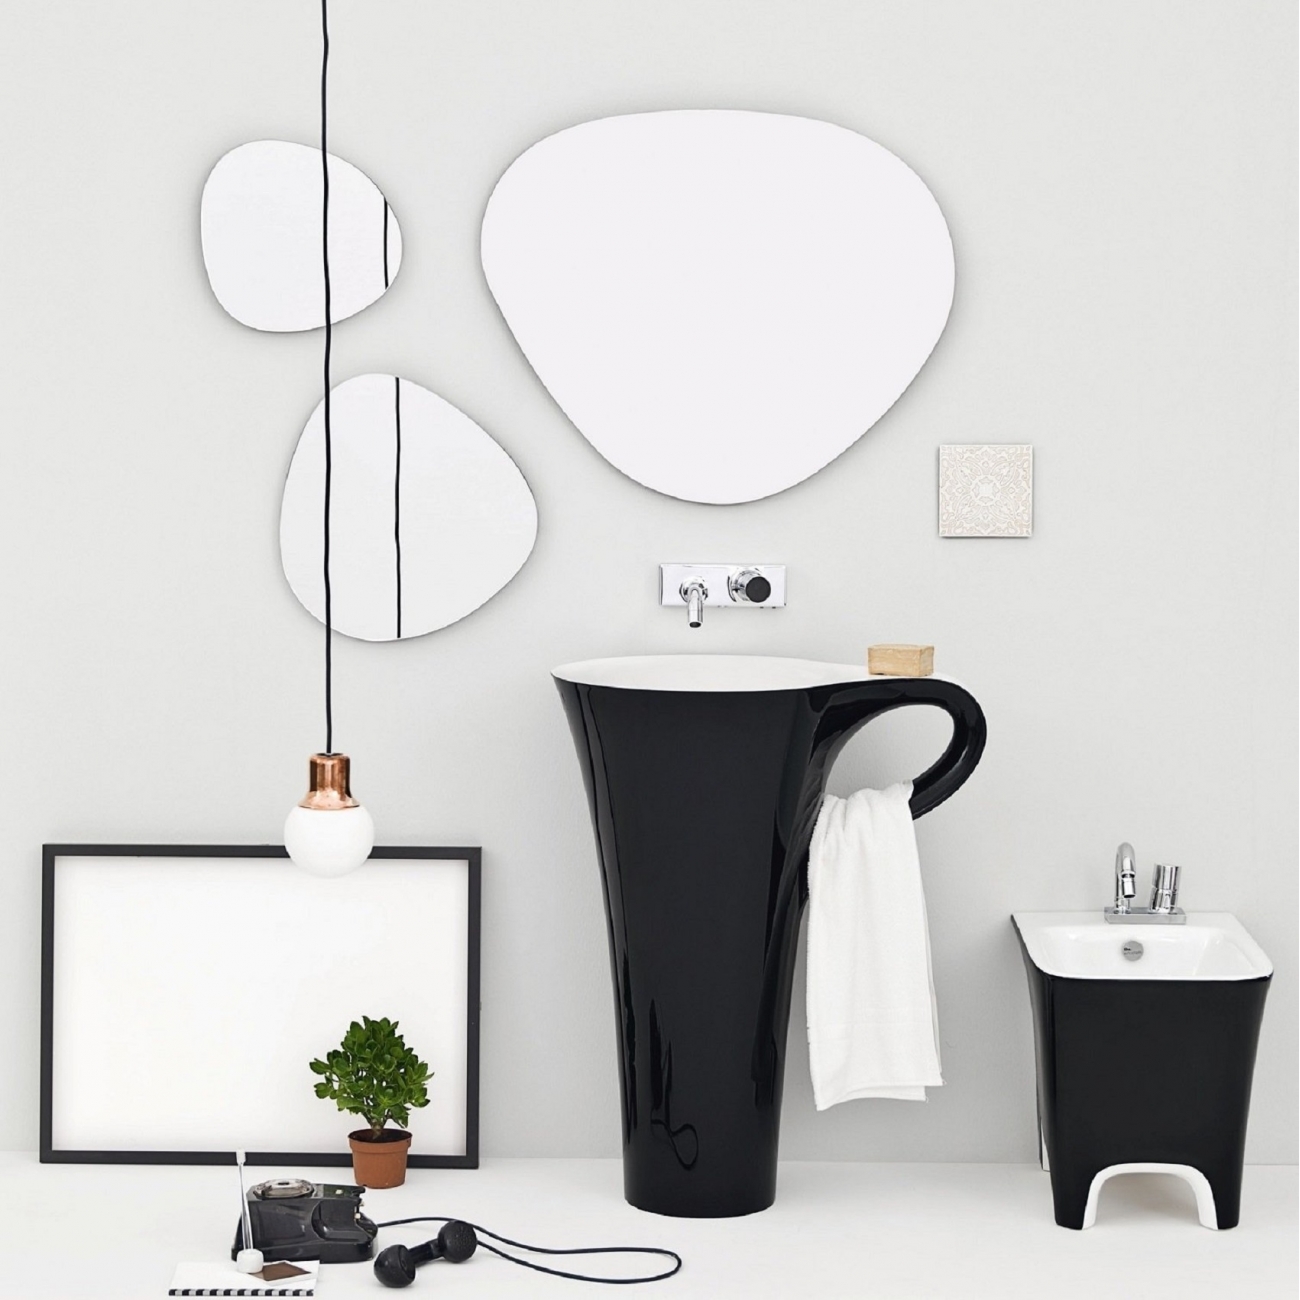 THE.ARTCERAM CUP LAVABO FREESTANDING